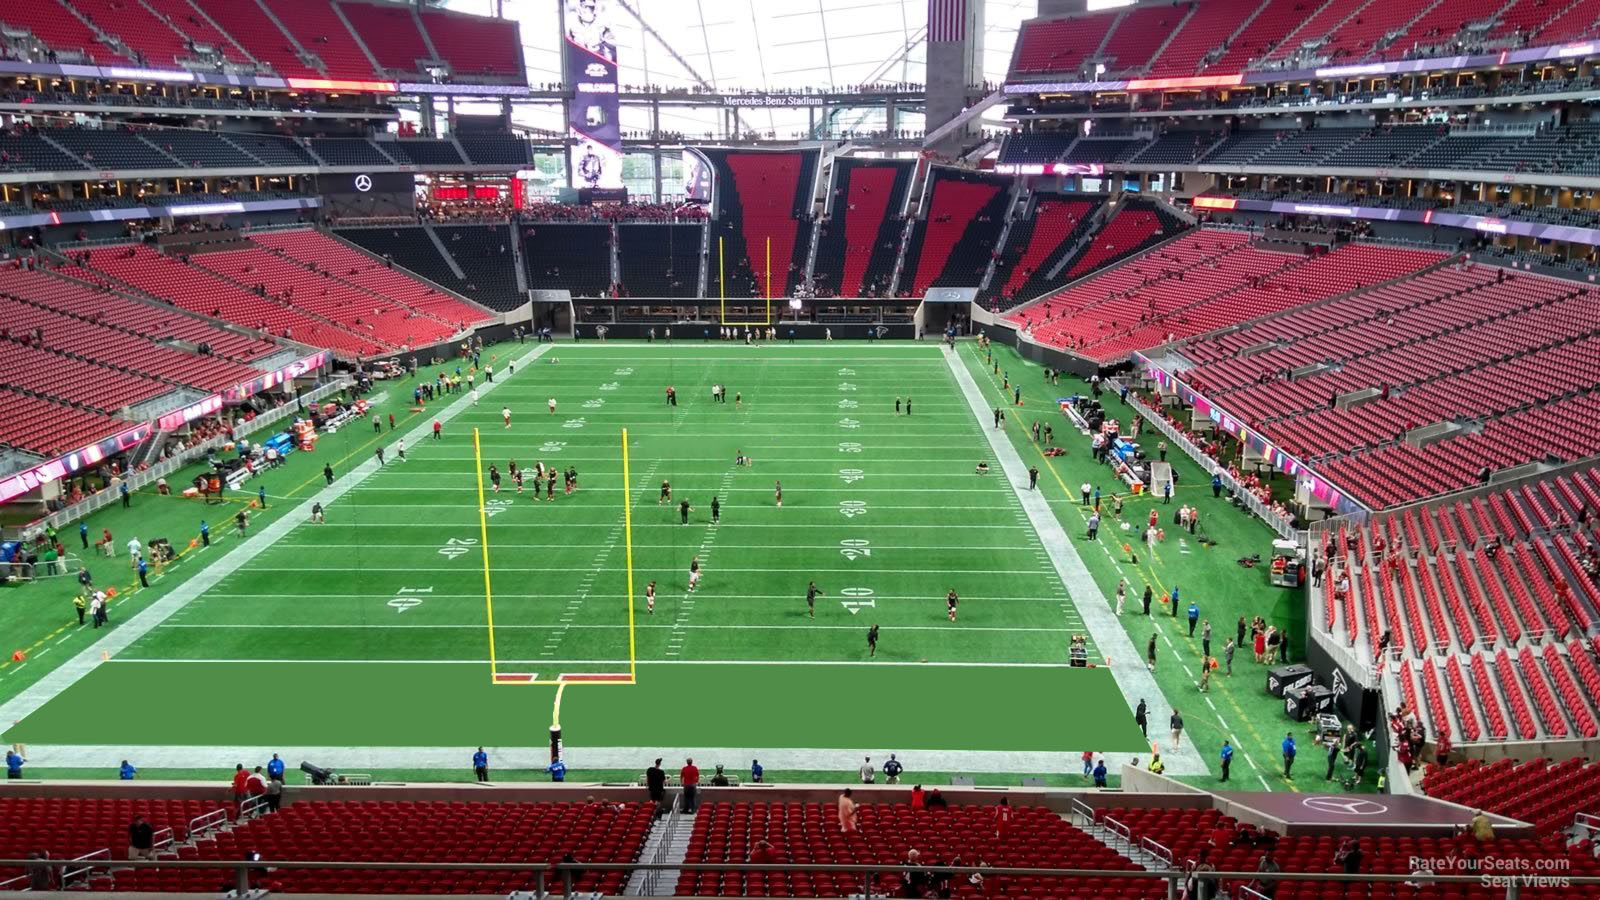 section 223, row 6 seat view  for football - mercedes-benz stadium